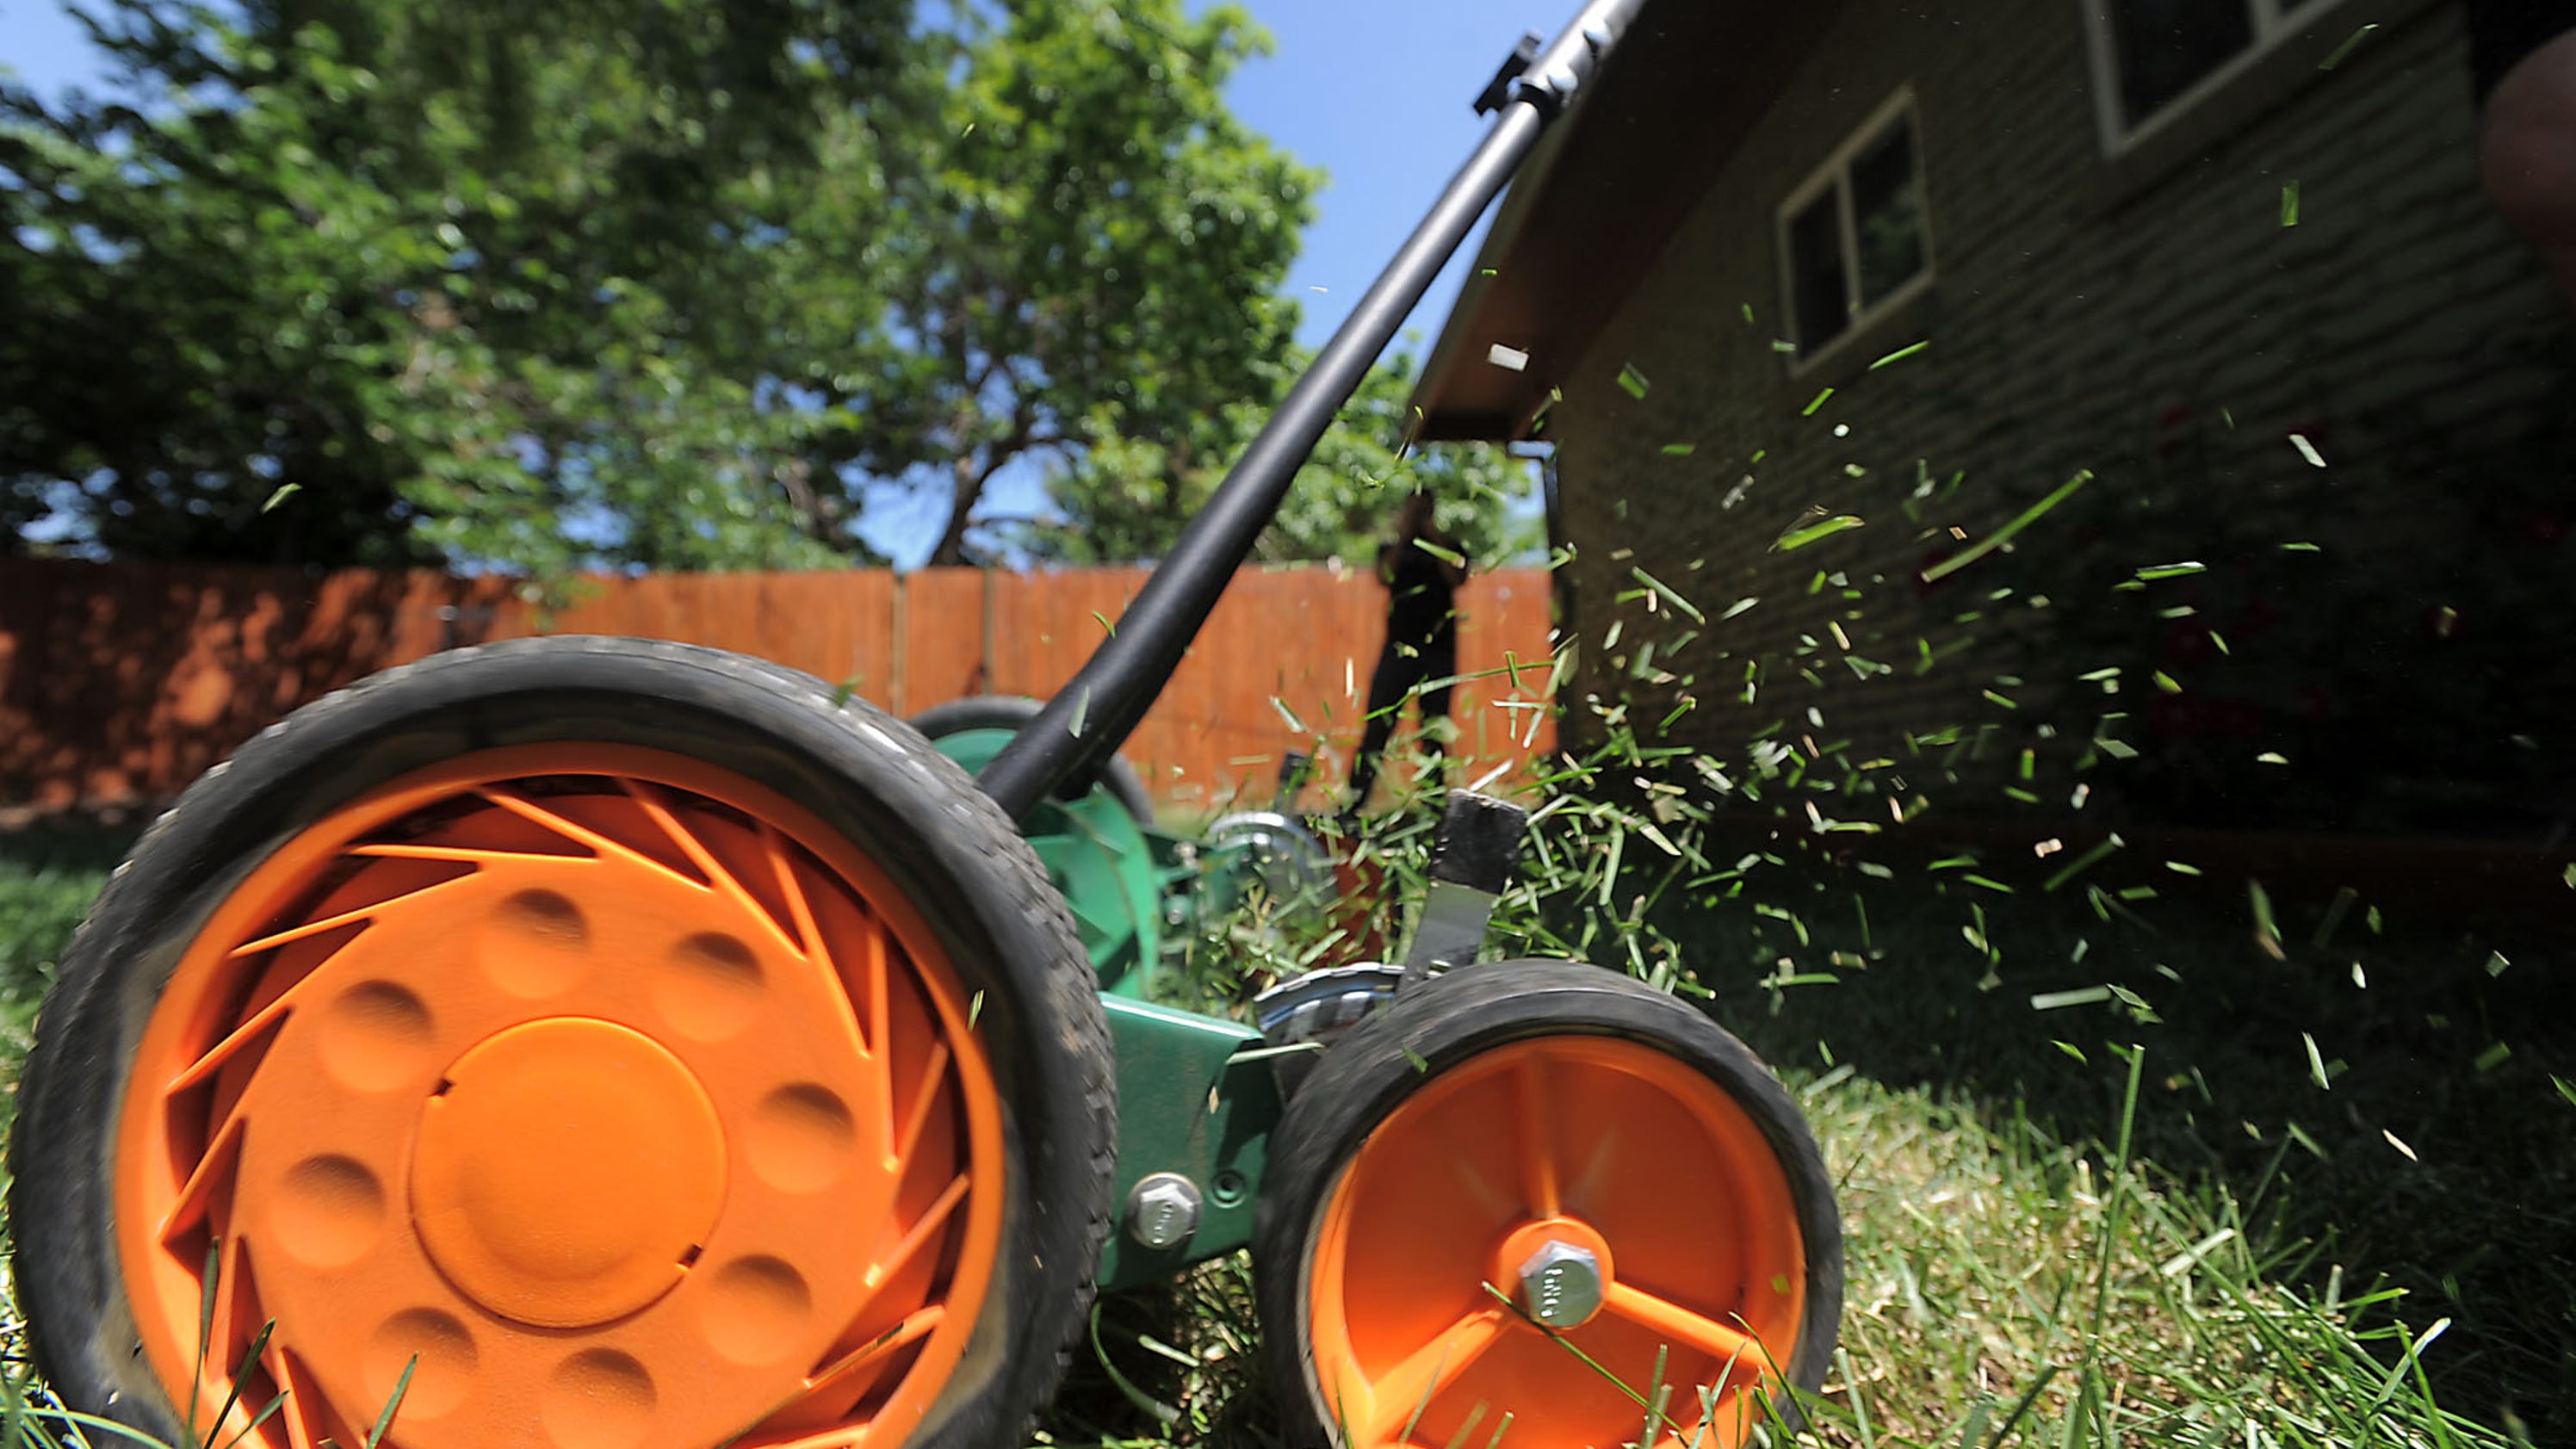 Fort Collins helps residents ditch gas lawnmowers